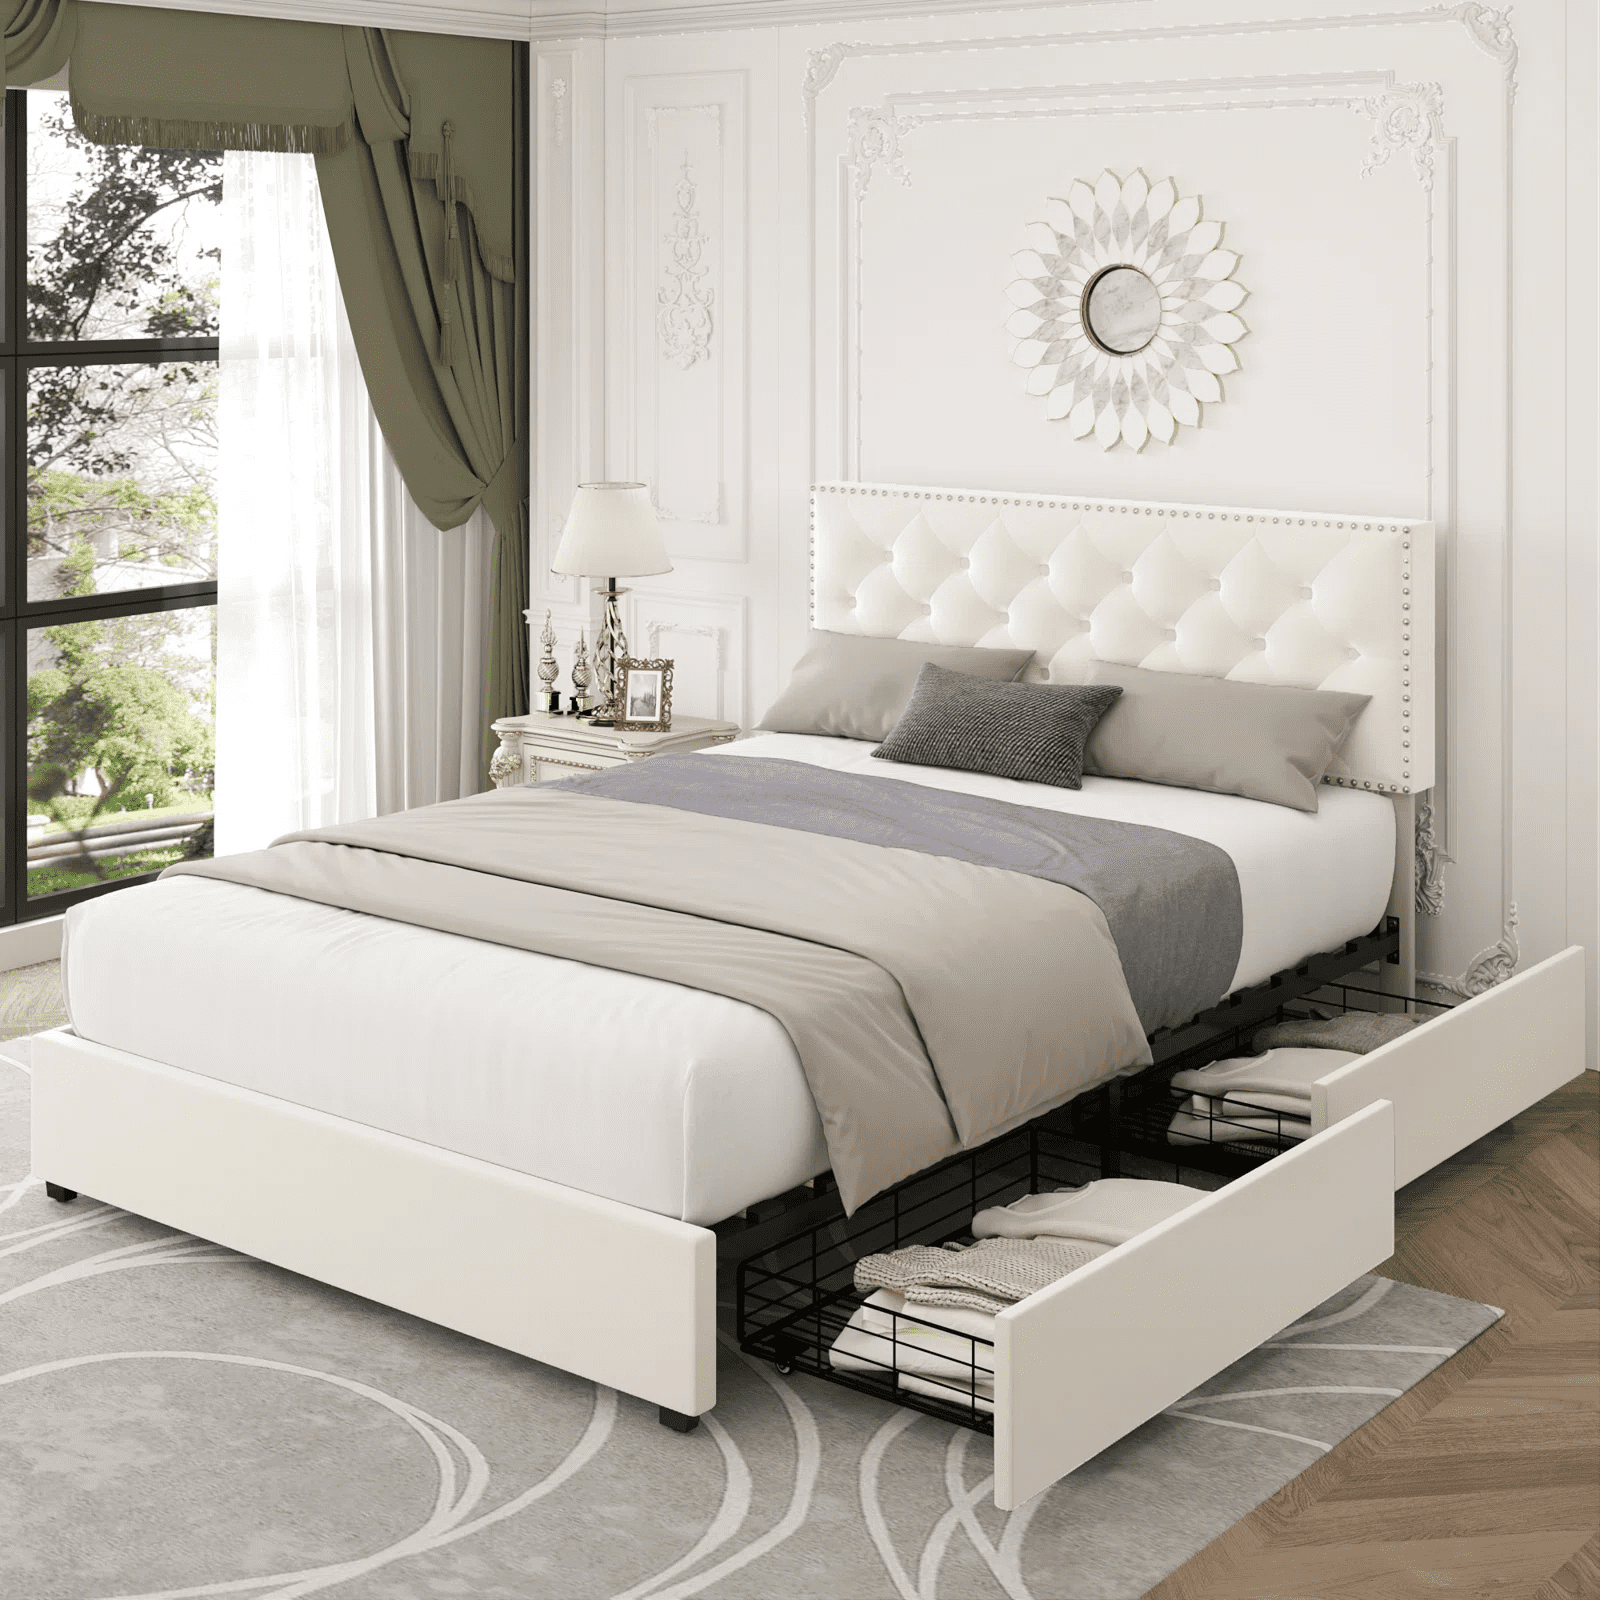 Homfa Full Size Storage Bed with 4 Drawers, Button Tufted Upholstered ...